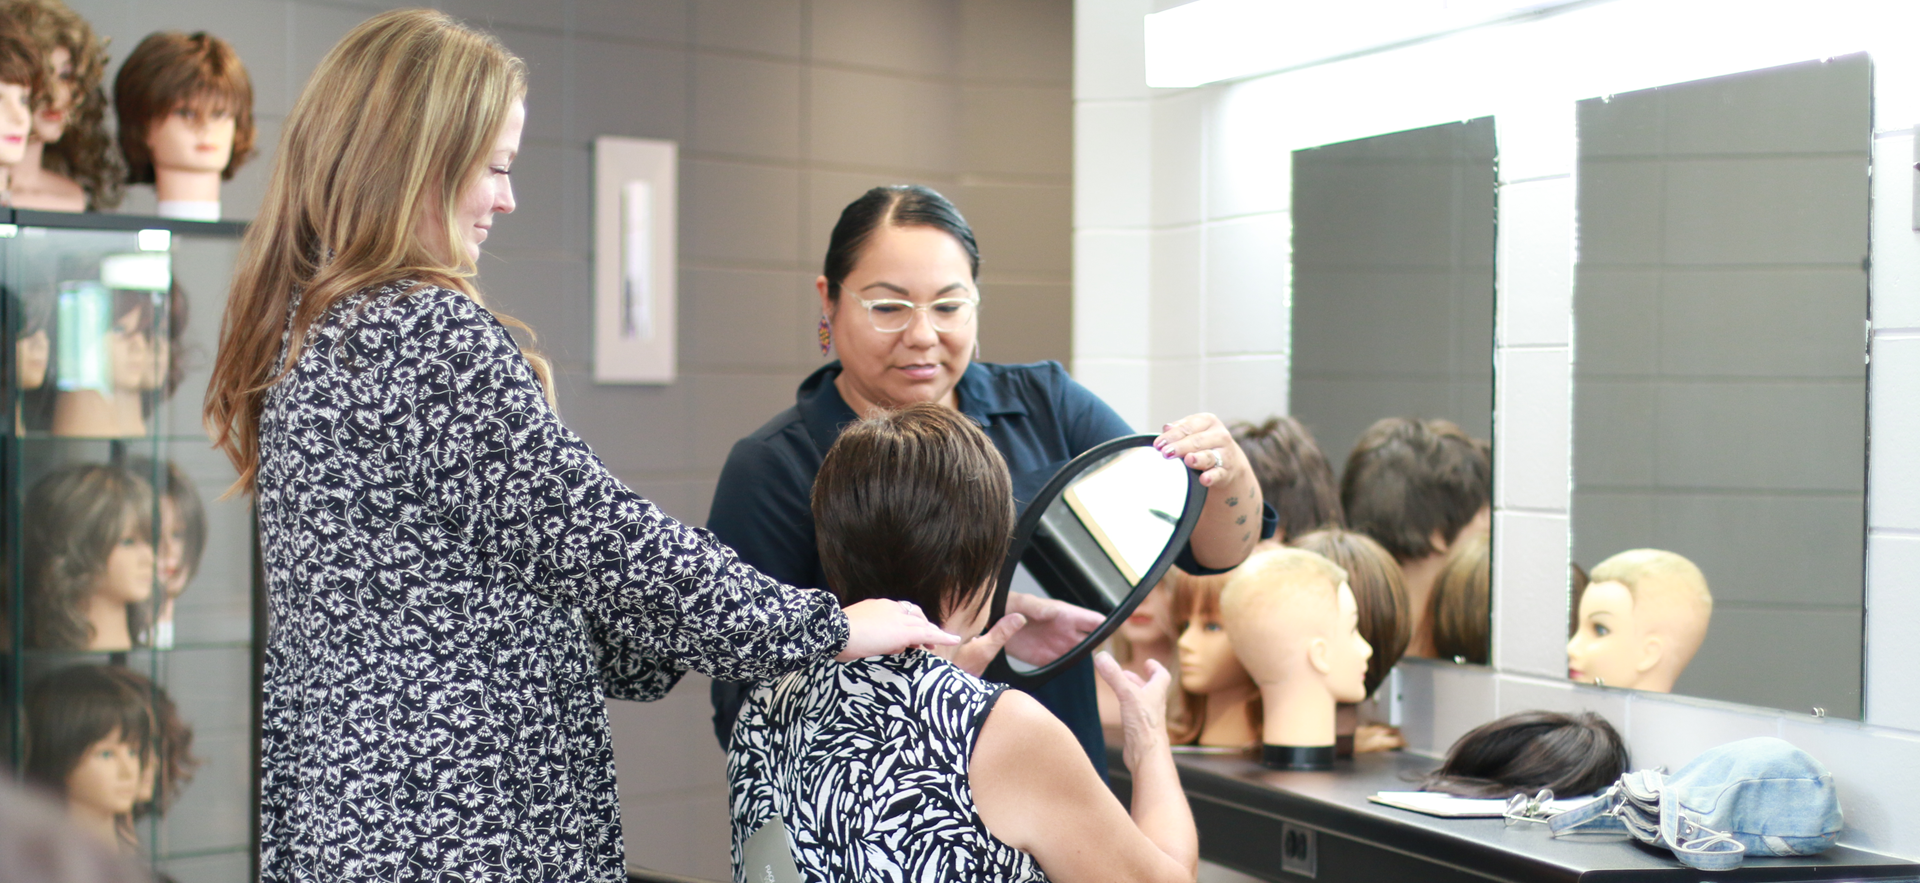 Hairstyling student and instructor helping client during a wig fitting